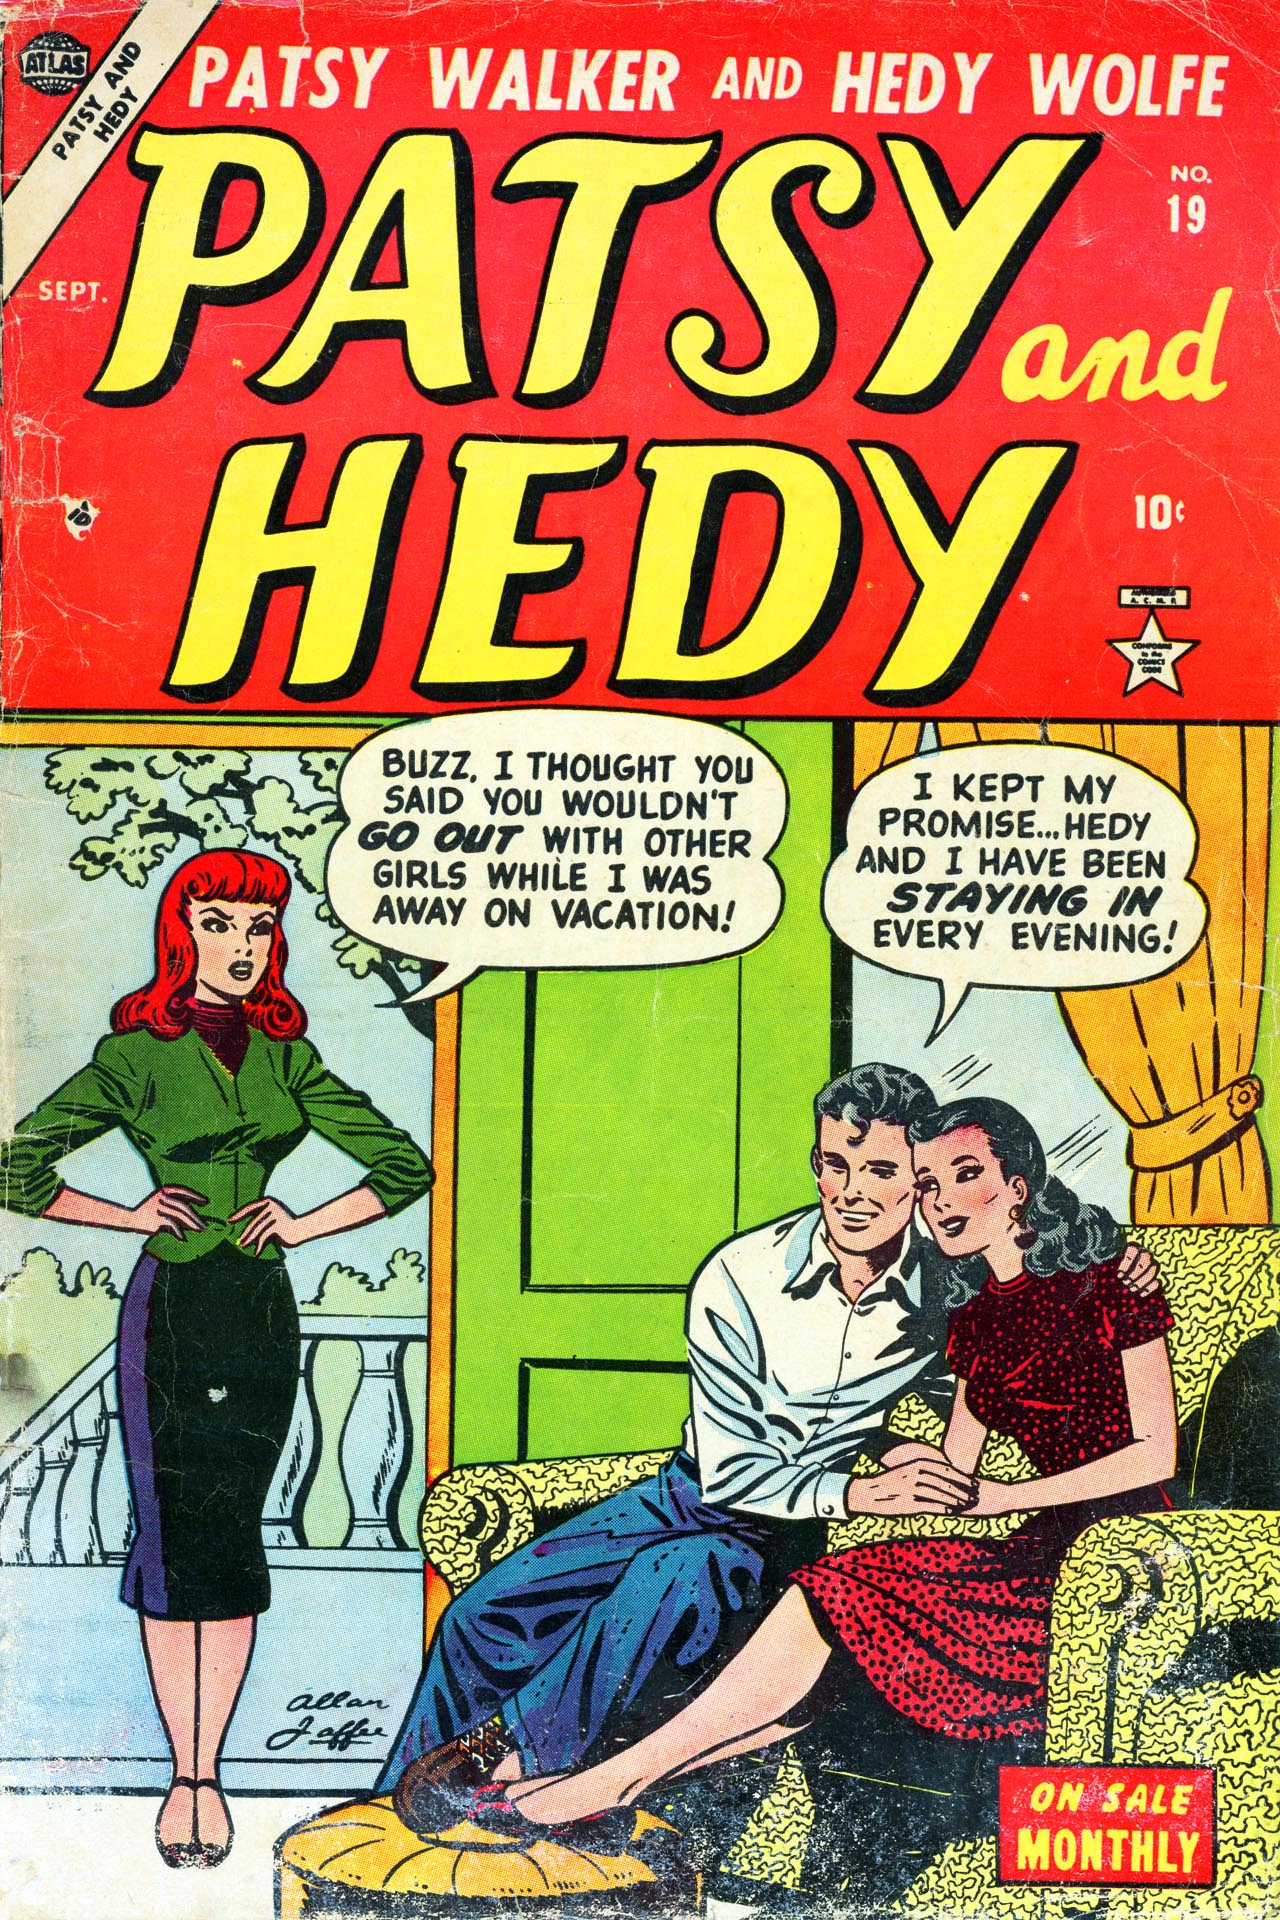 Read online Patsy and Hedy comic -  Issue #19 - 1